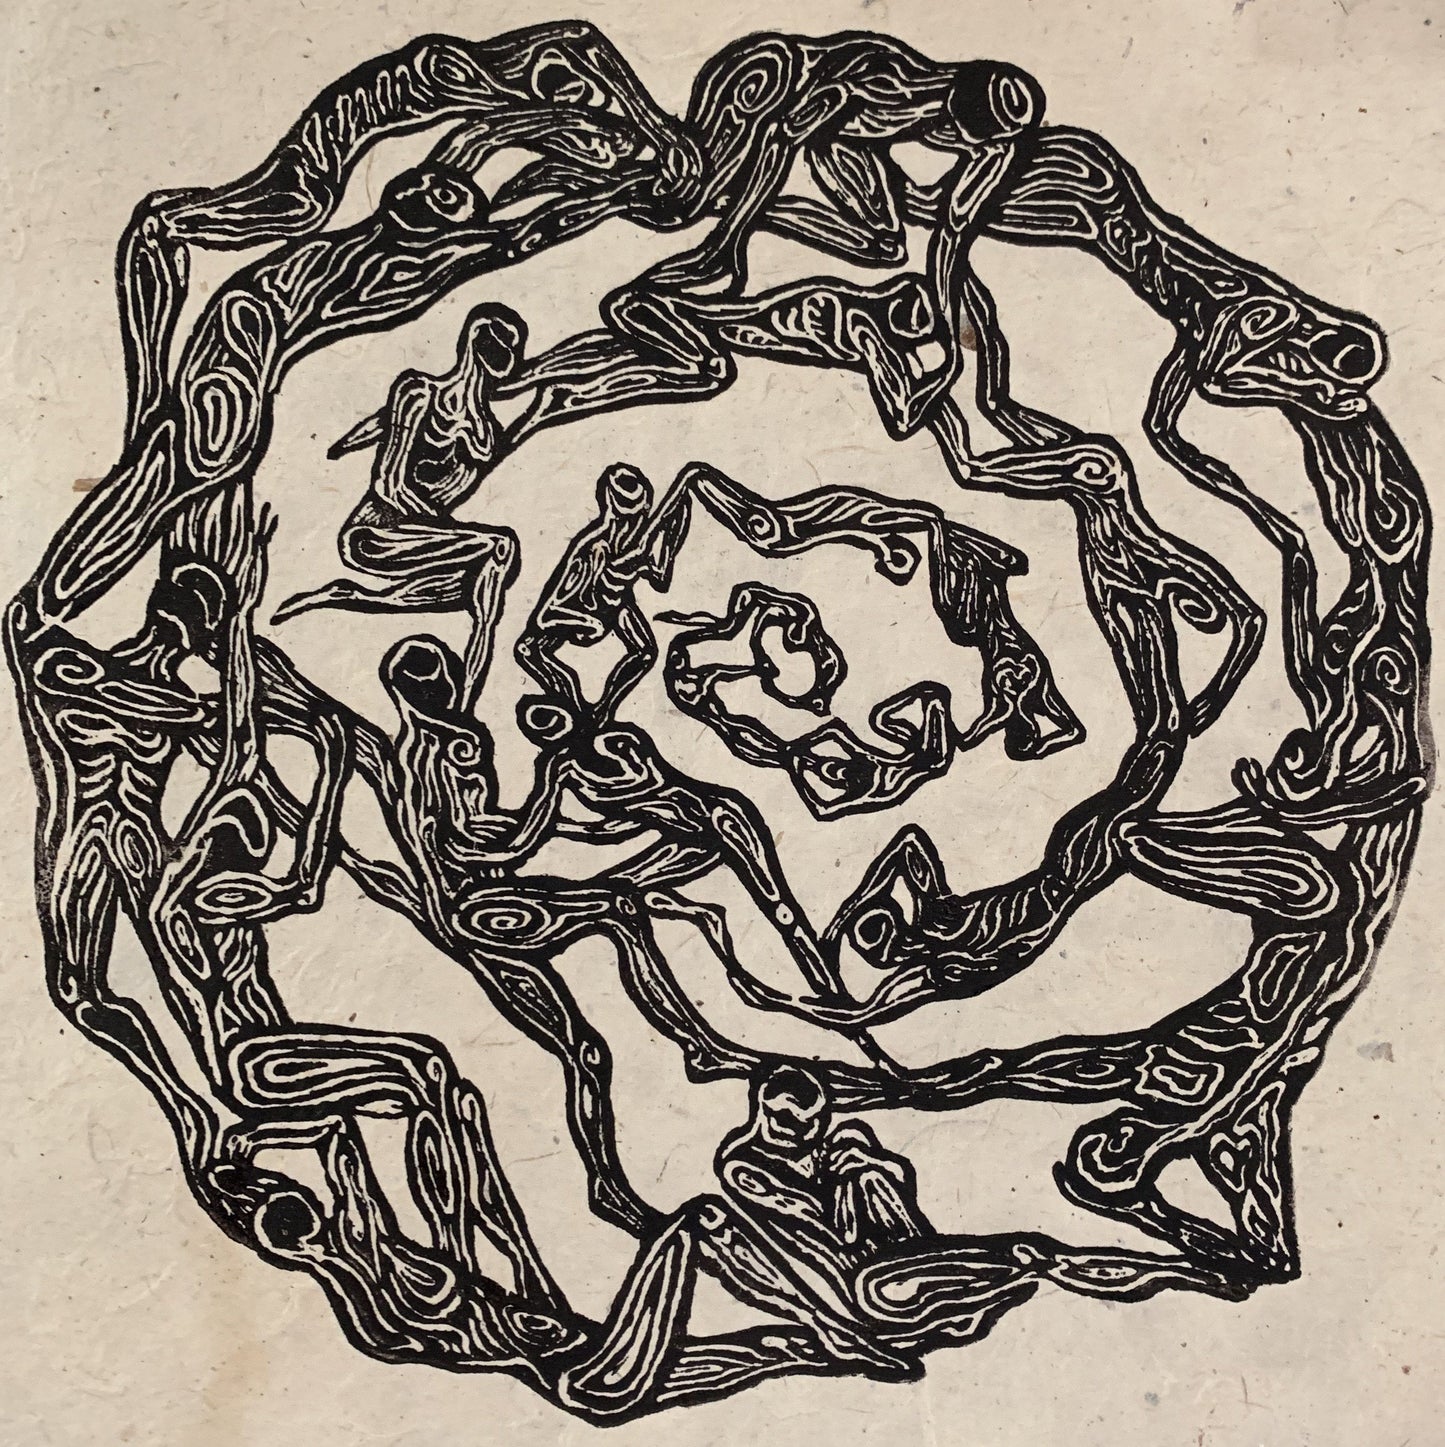 Original Woodcut Fragile print on handmade paper Daphne mandala of connected figures 10x10 inches